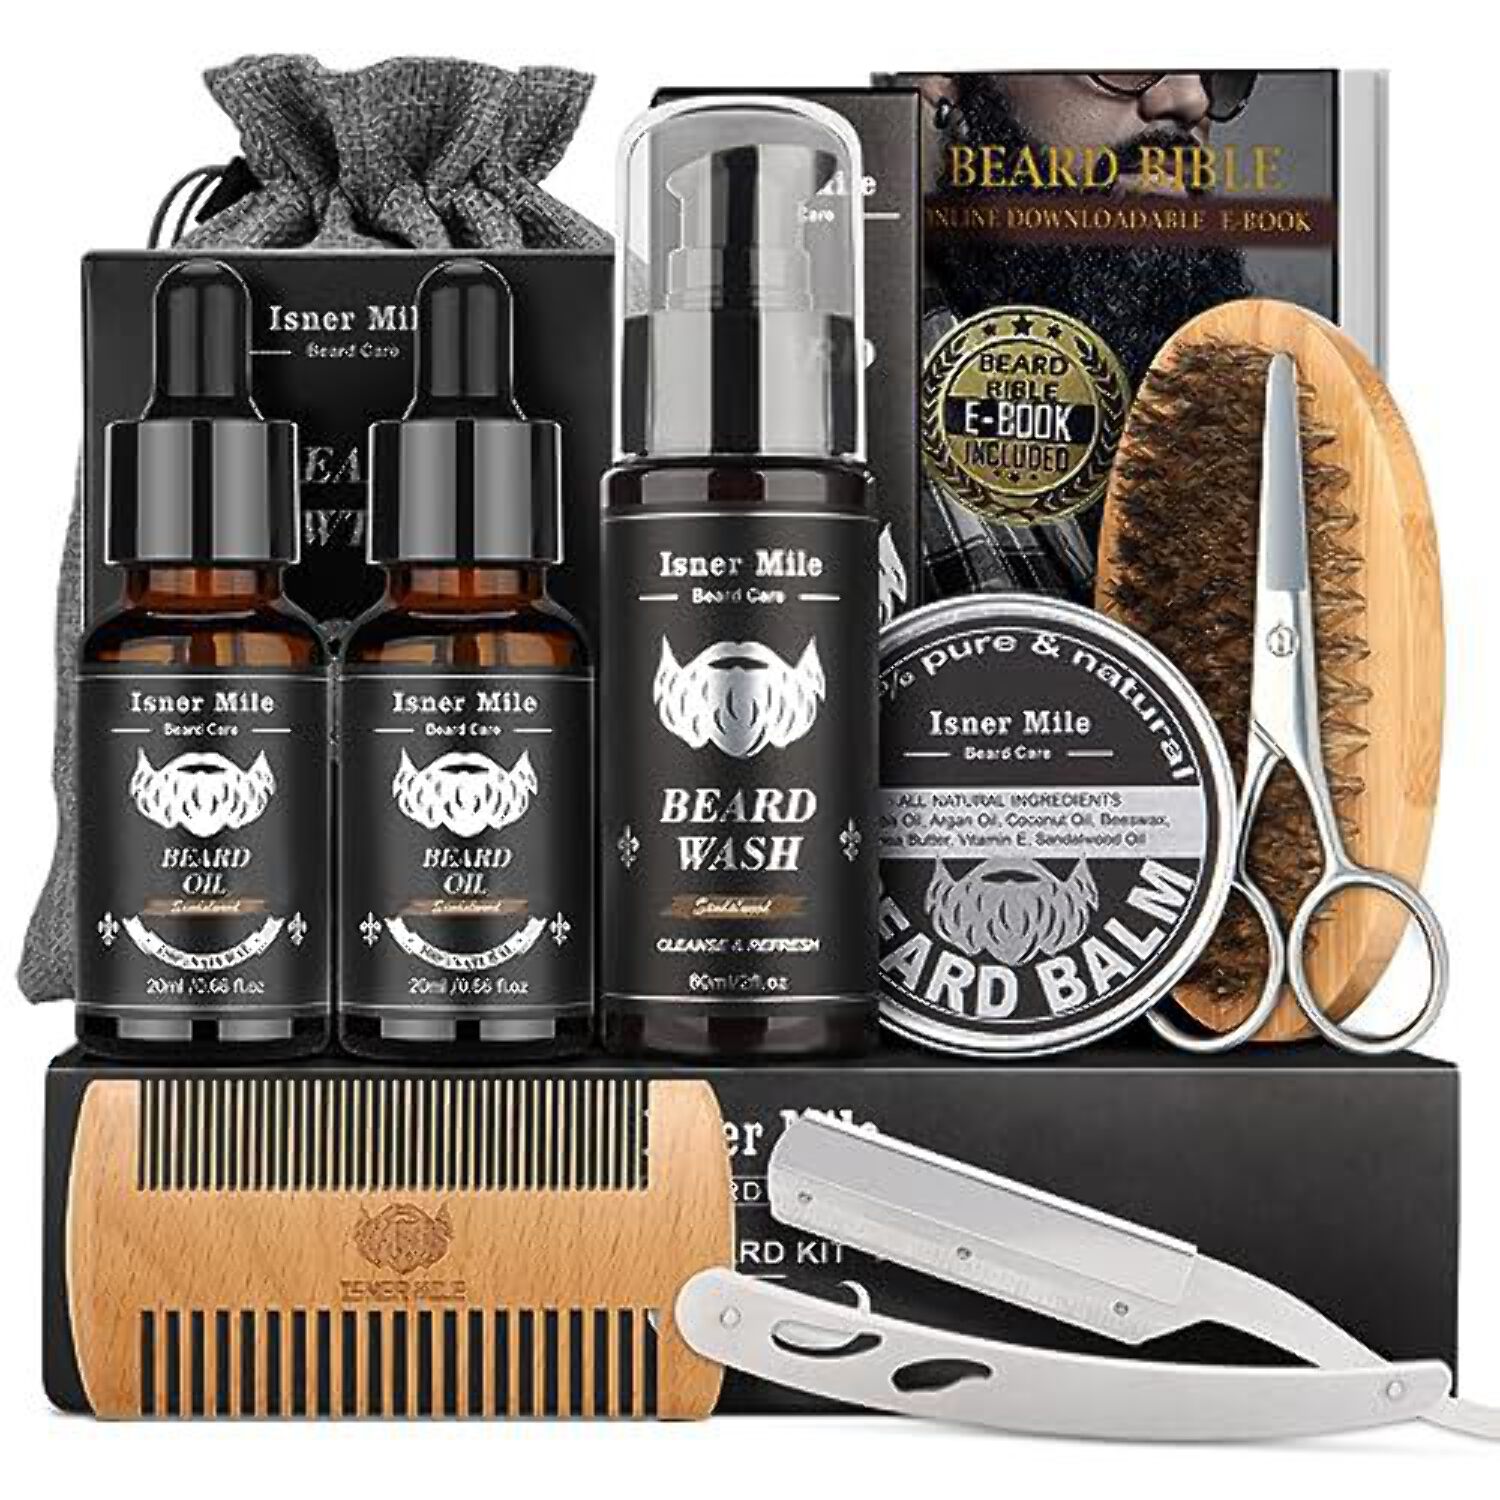 Isner Mile Beard Kit for Men, Grooming  Trimming Tool Complete Set with Shampoo Wash, Beard Care Oil, Balm, Brush, Comb, Scissors  Storage Bag, Perfect Gifts for Him Man Dad Father Boyfriend - image 1 of 7